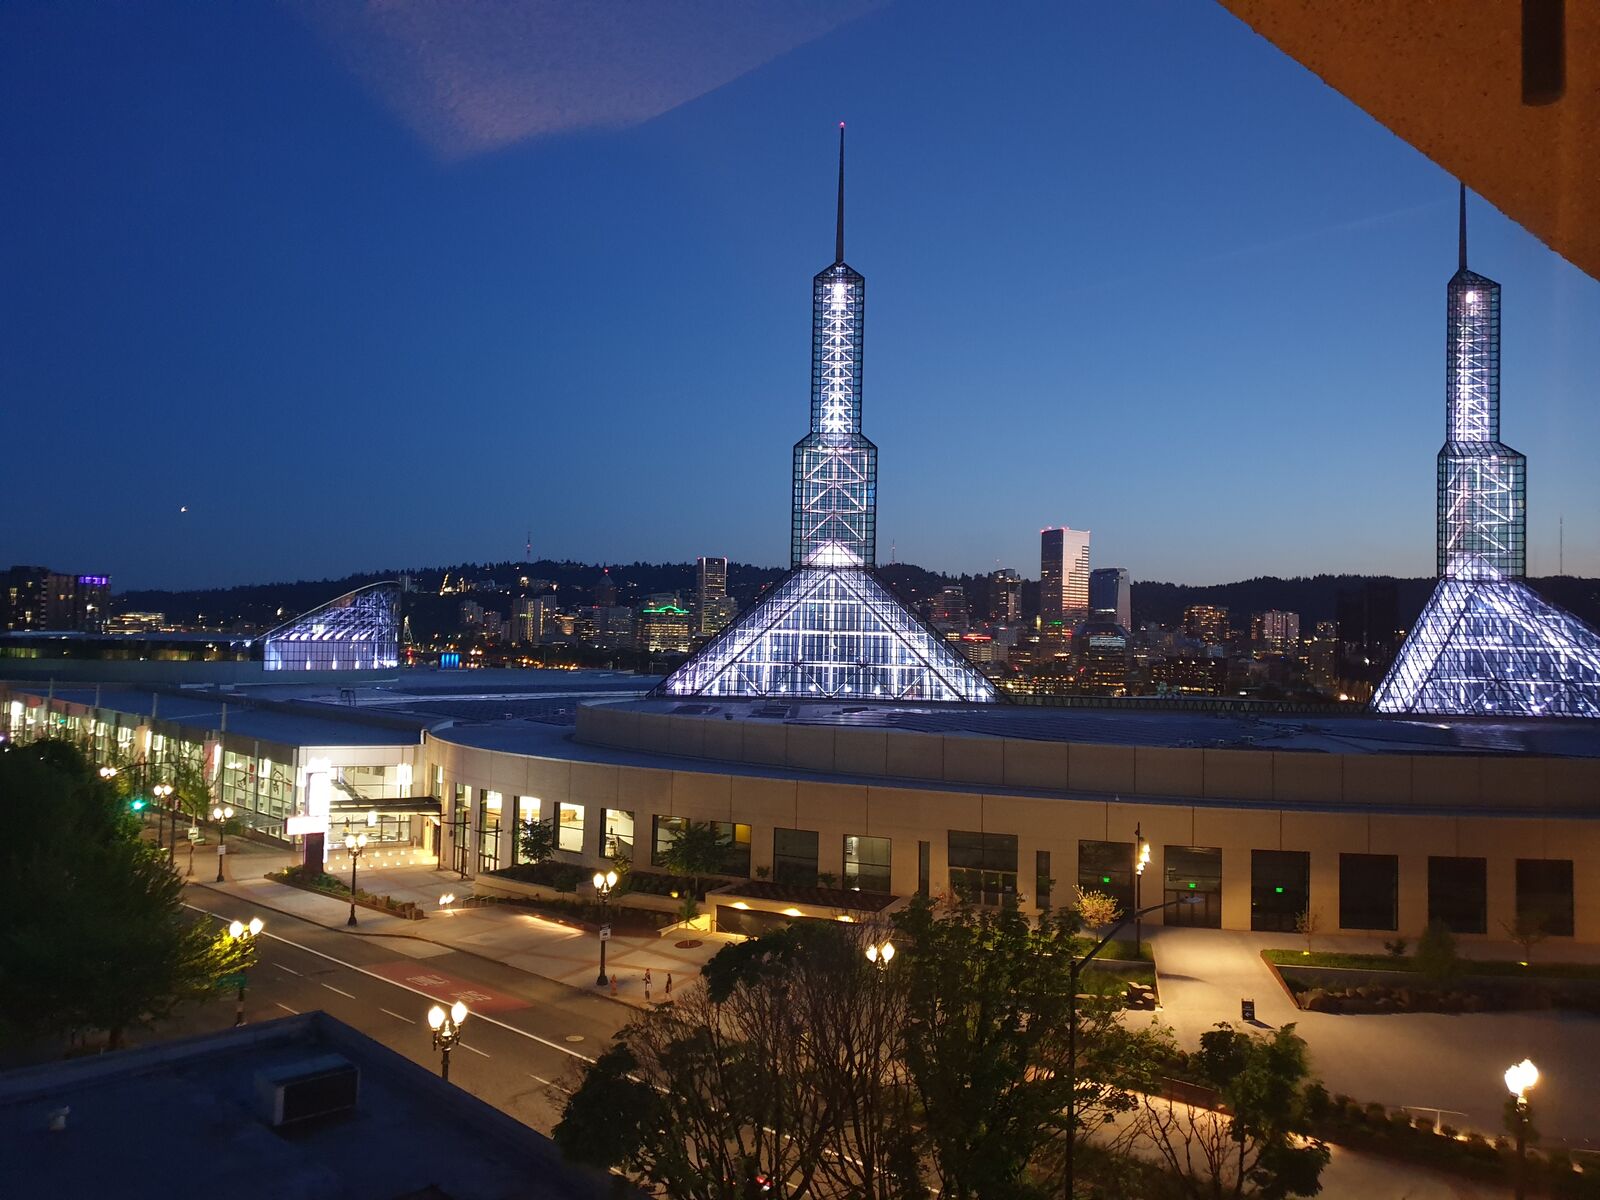 The Oregon Conferention Center has two quite distinct glass towers that can be seen from all over the city.